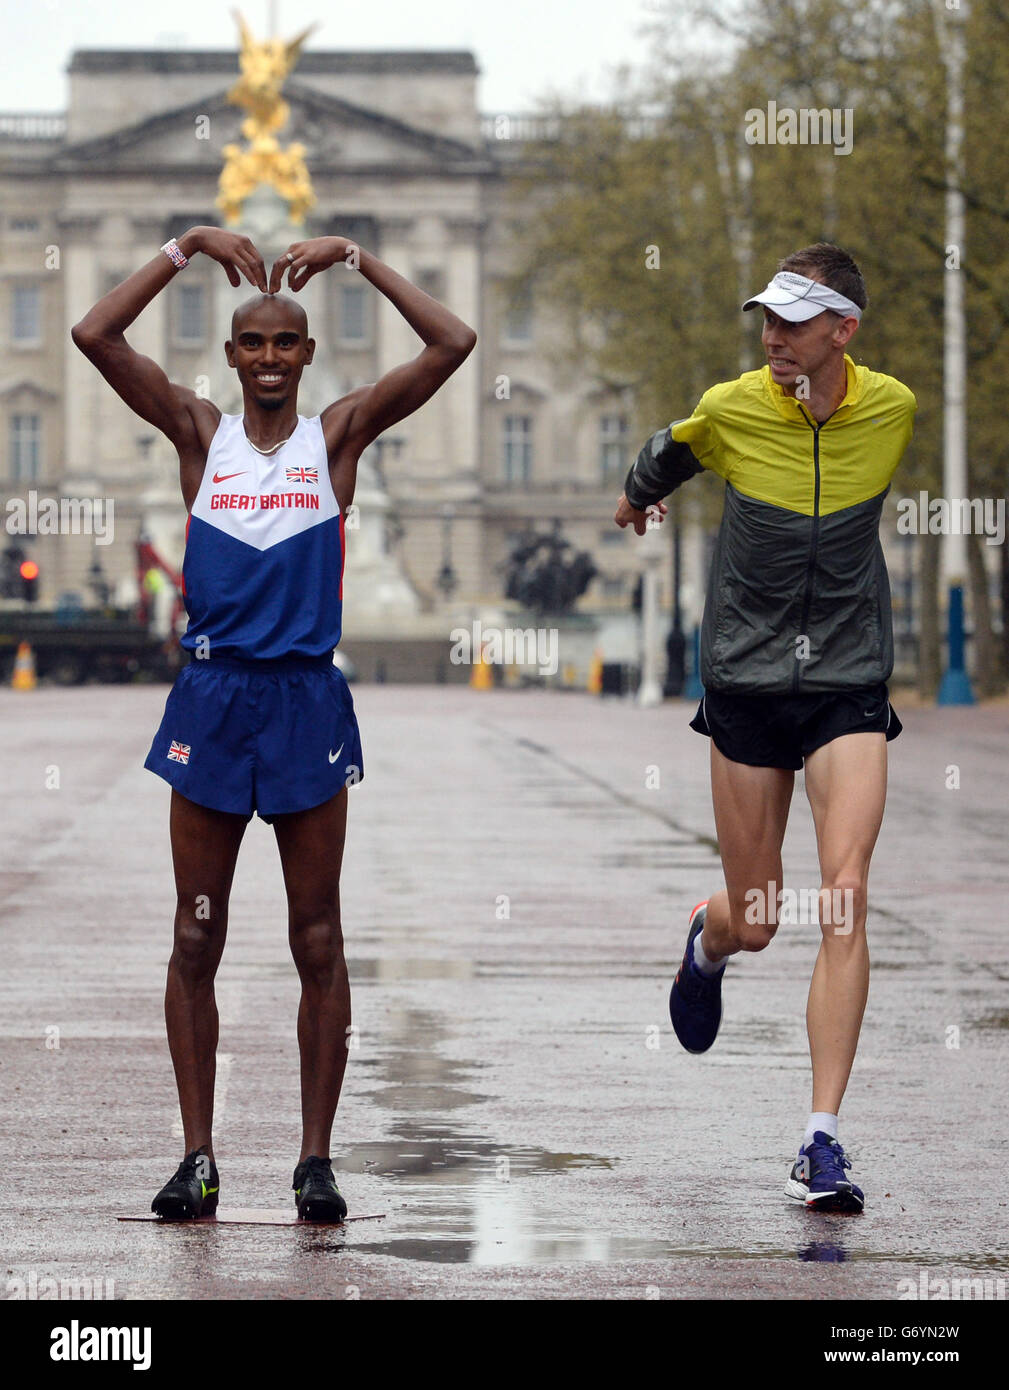 One of the two wax works of the British athlete Mo Farah stand in The Mall in London today before they are taken to Madame Tussauds' museums in London and Blackpool later this month. Stock Photo